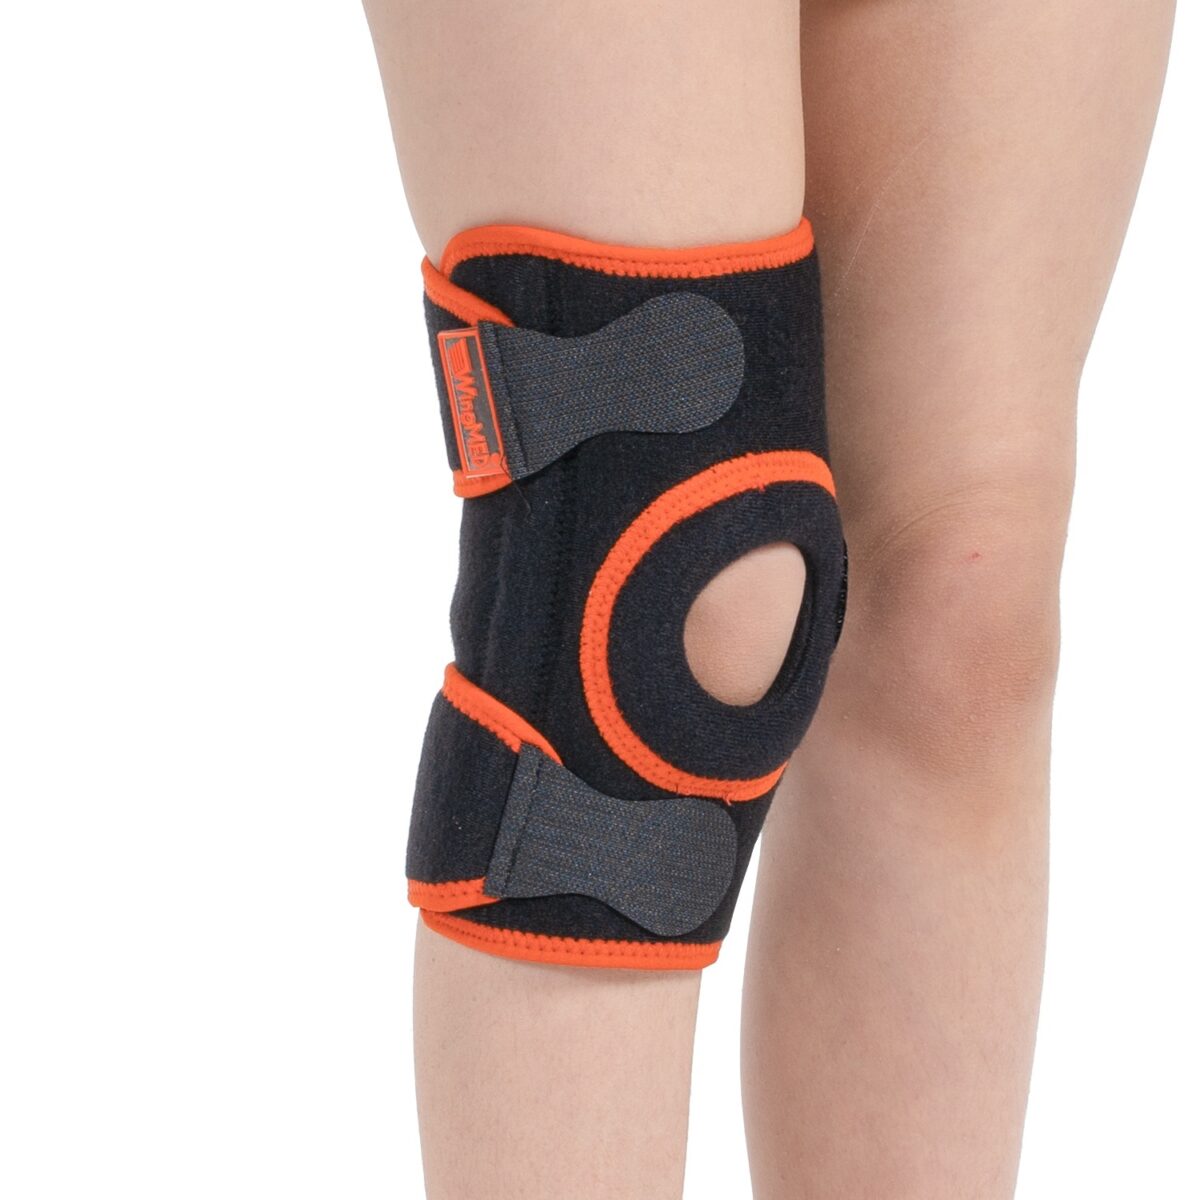 wingmed orthopedic equipments W918 ligament knee support 93